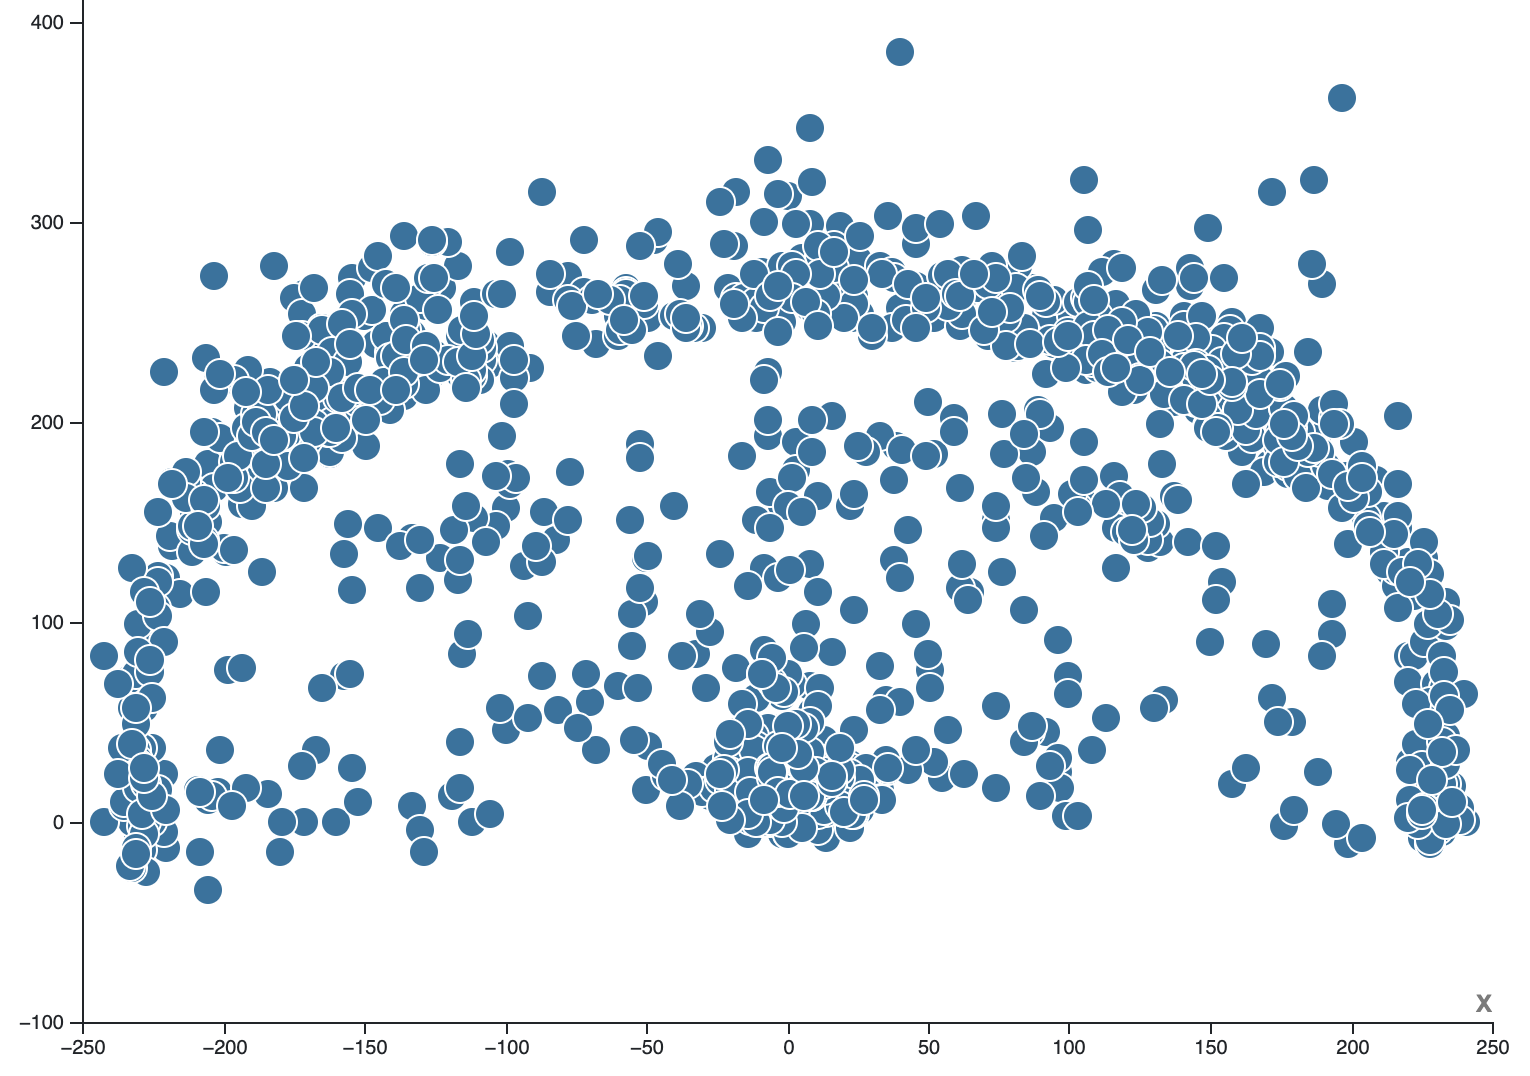 A scatter plot showing unspecified data. The plot has a lot of overlapping dots